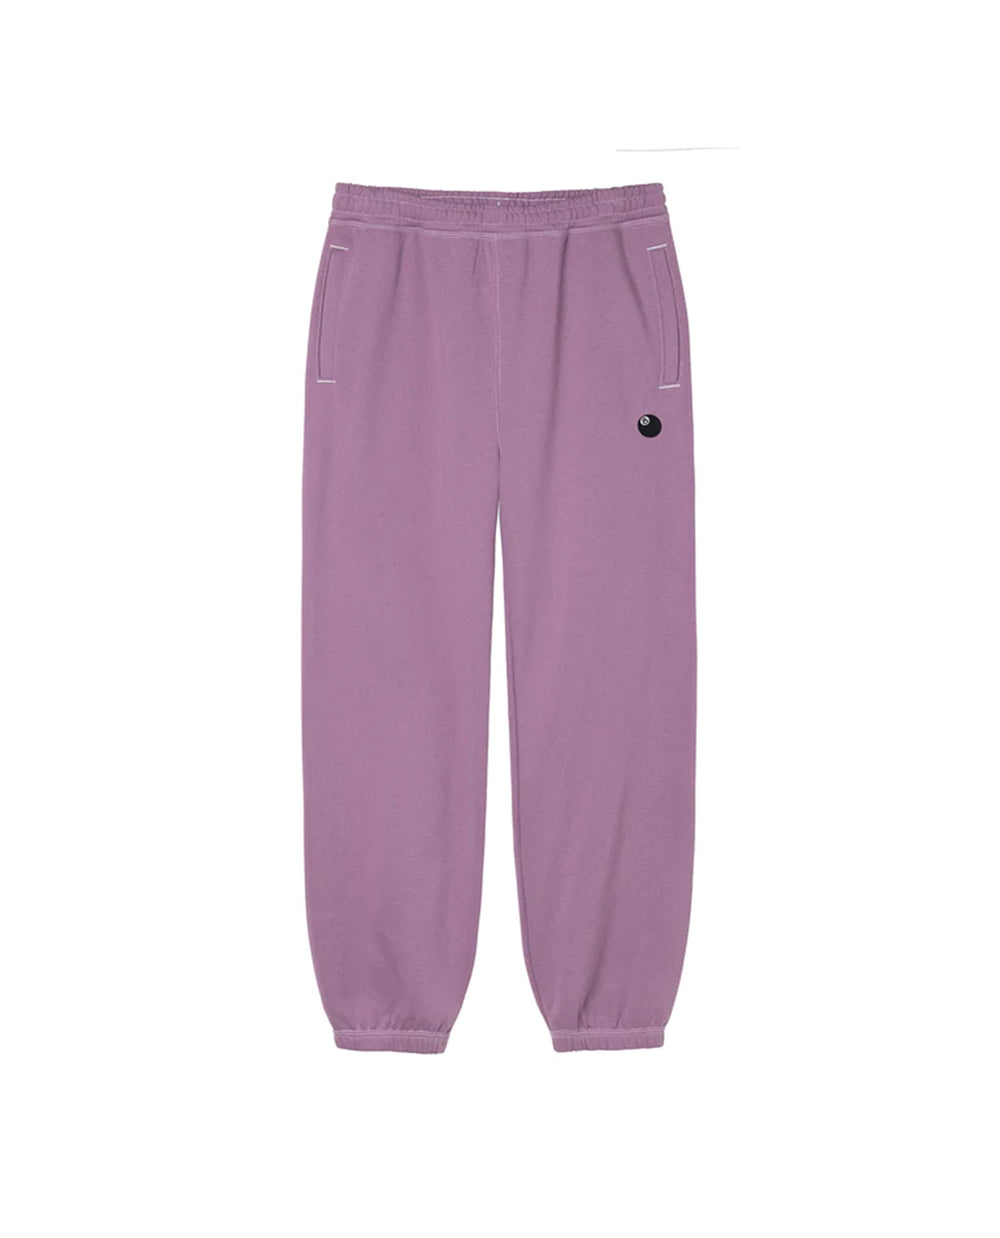 Stussy 8 Ball Applique Pant STASHED